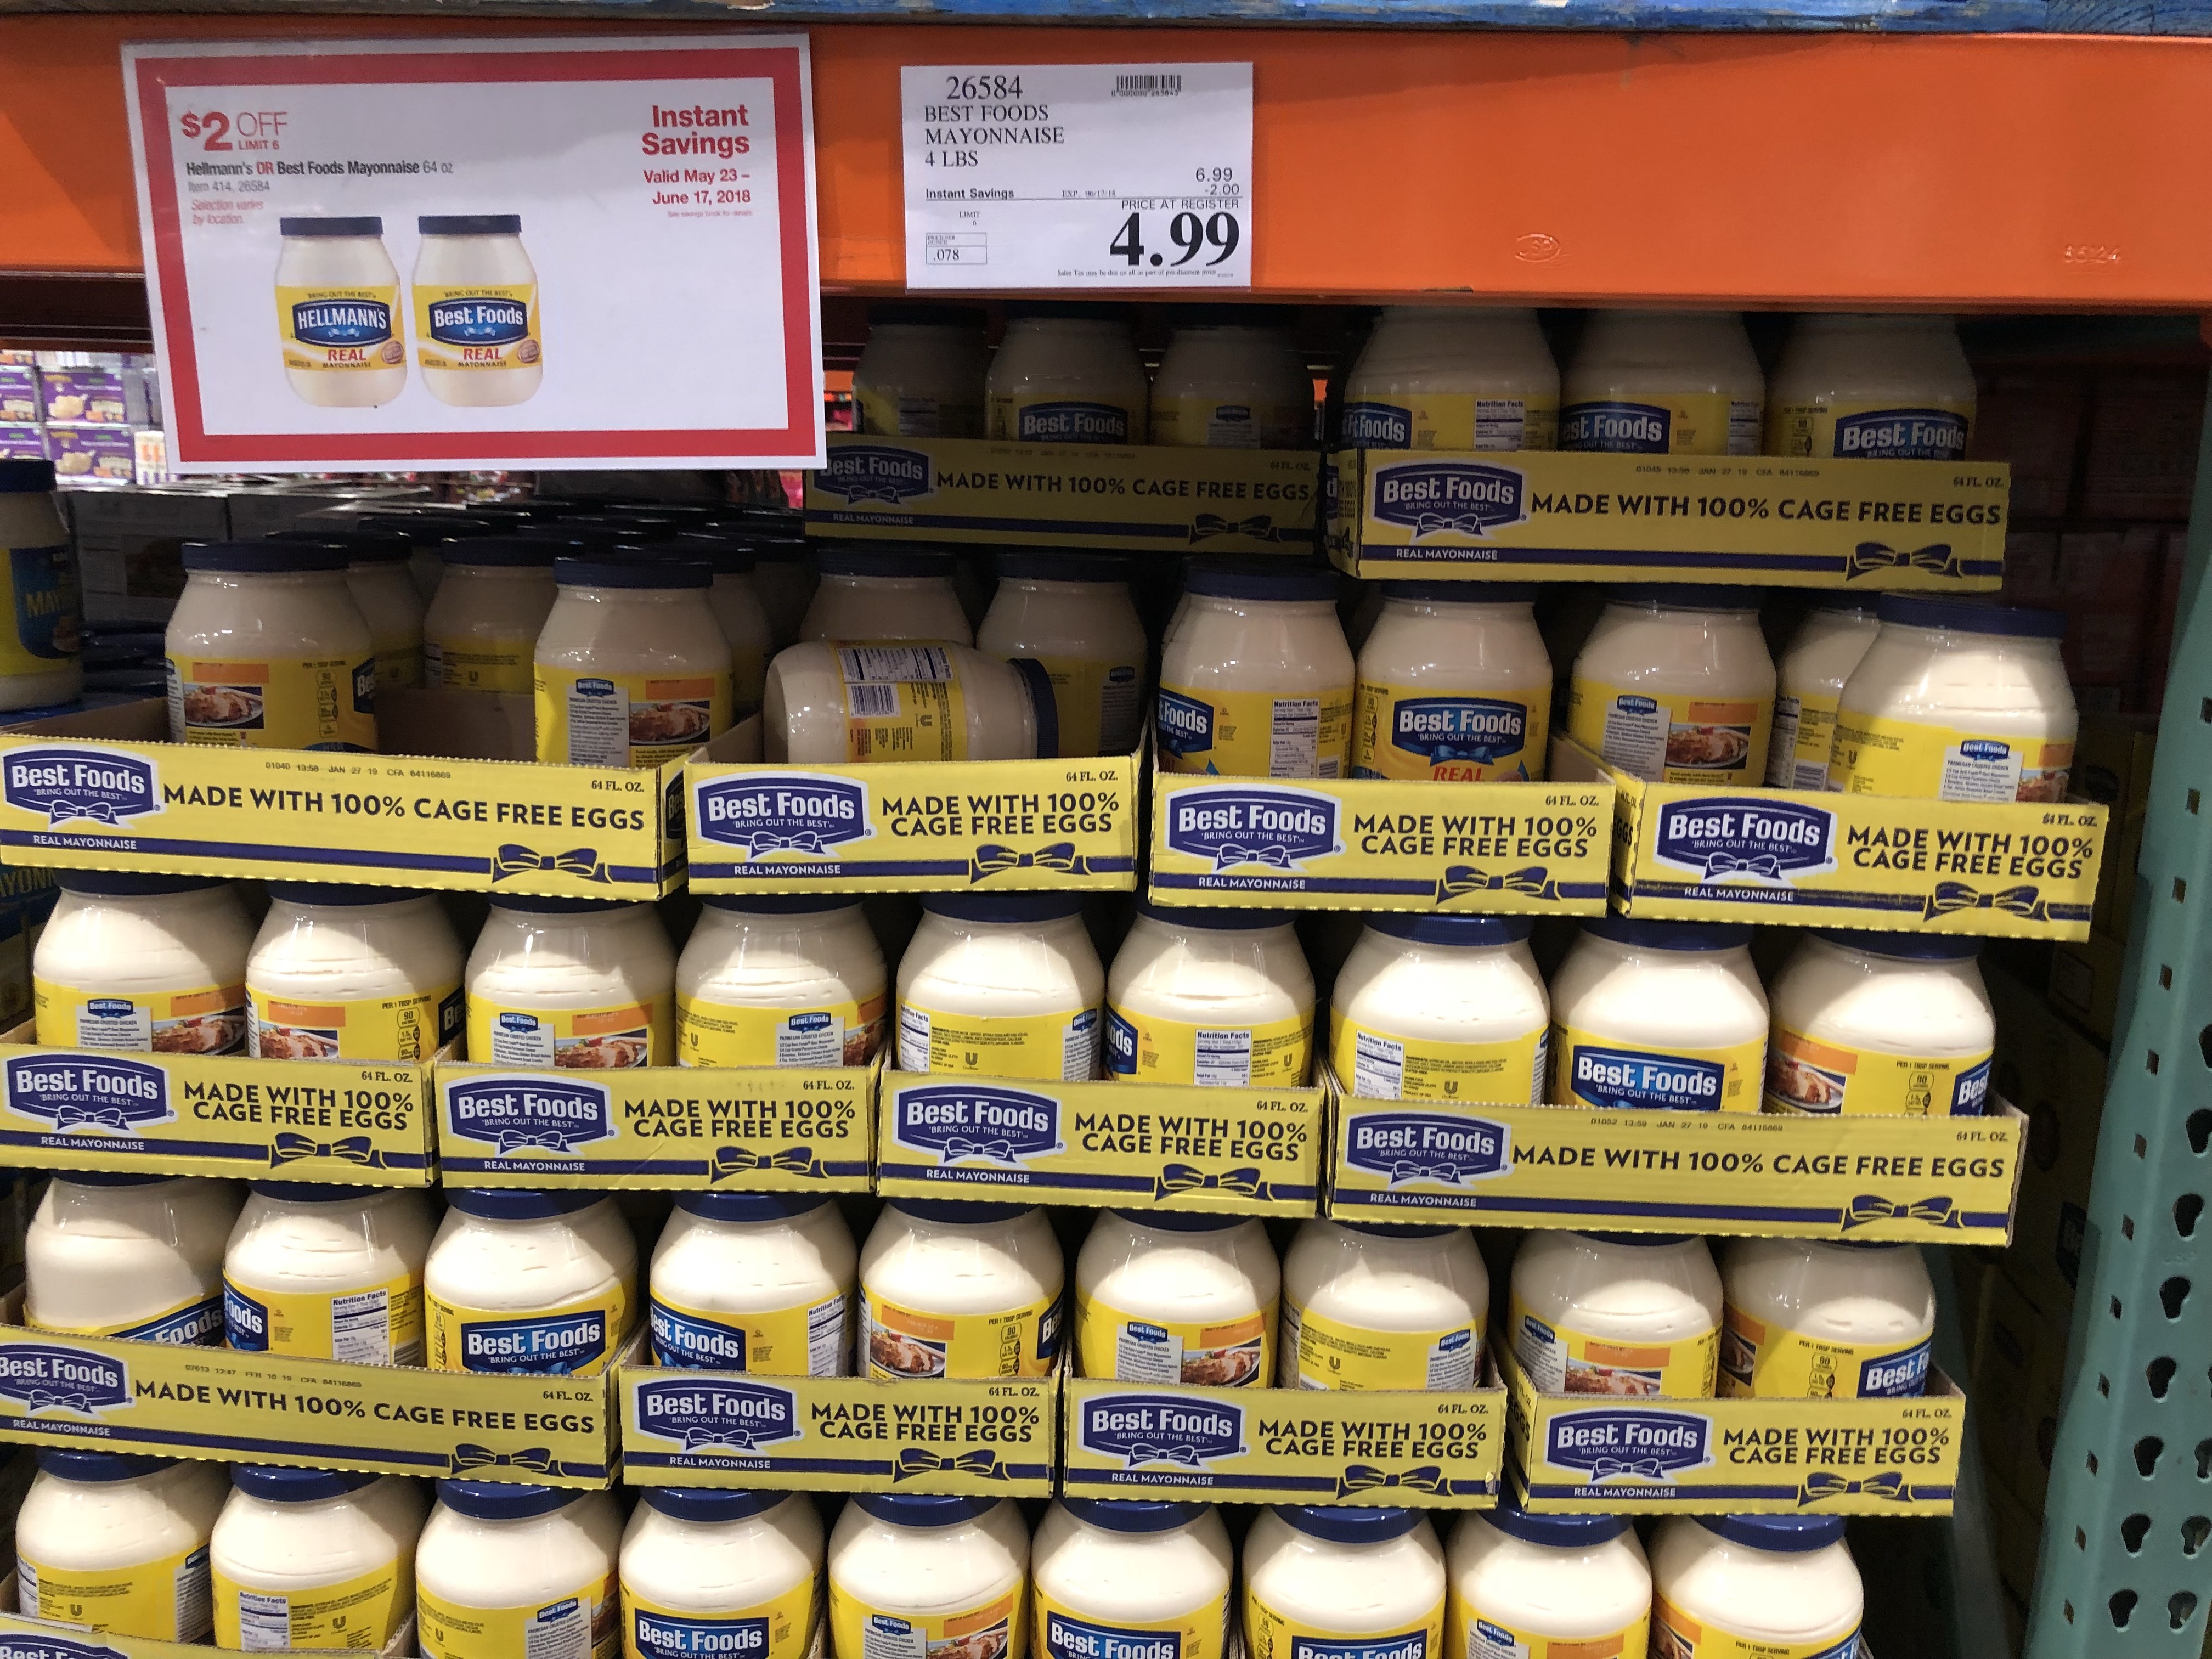 new costco instant savings deals – mayonnaise on a shelf